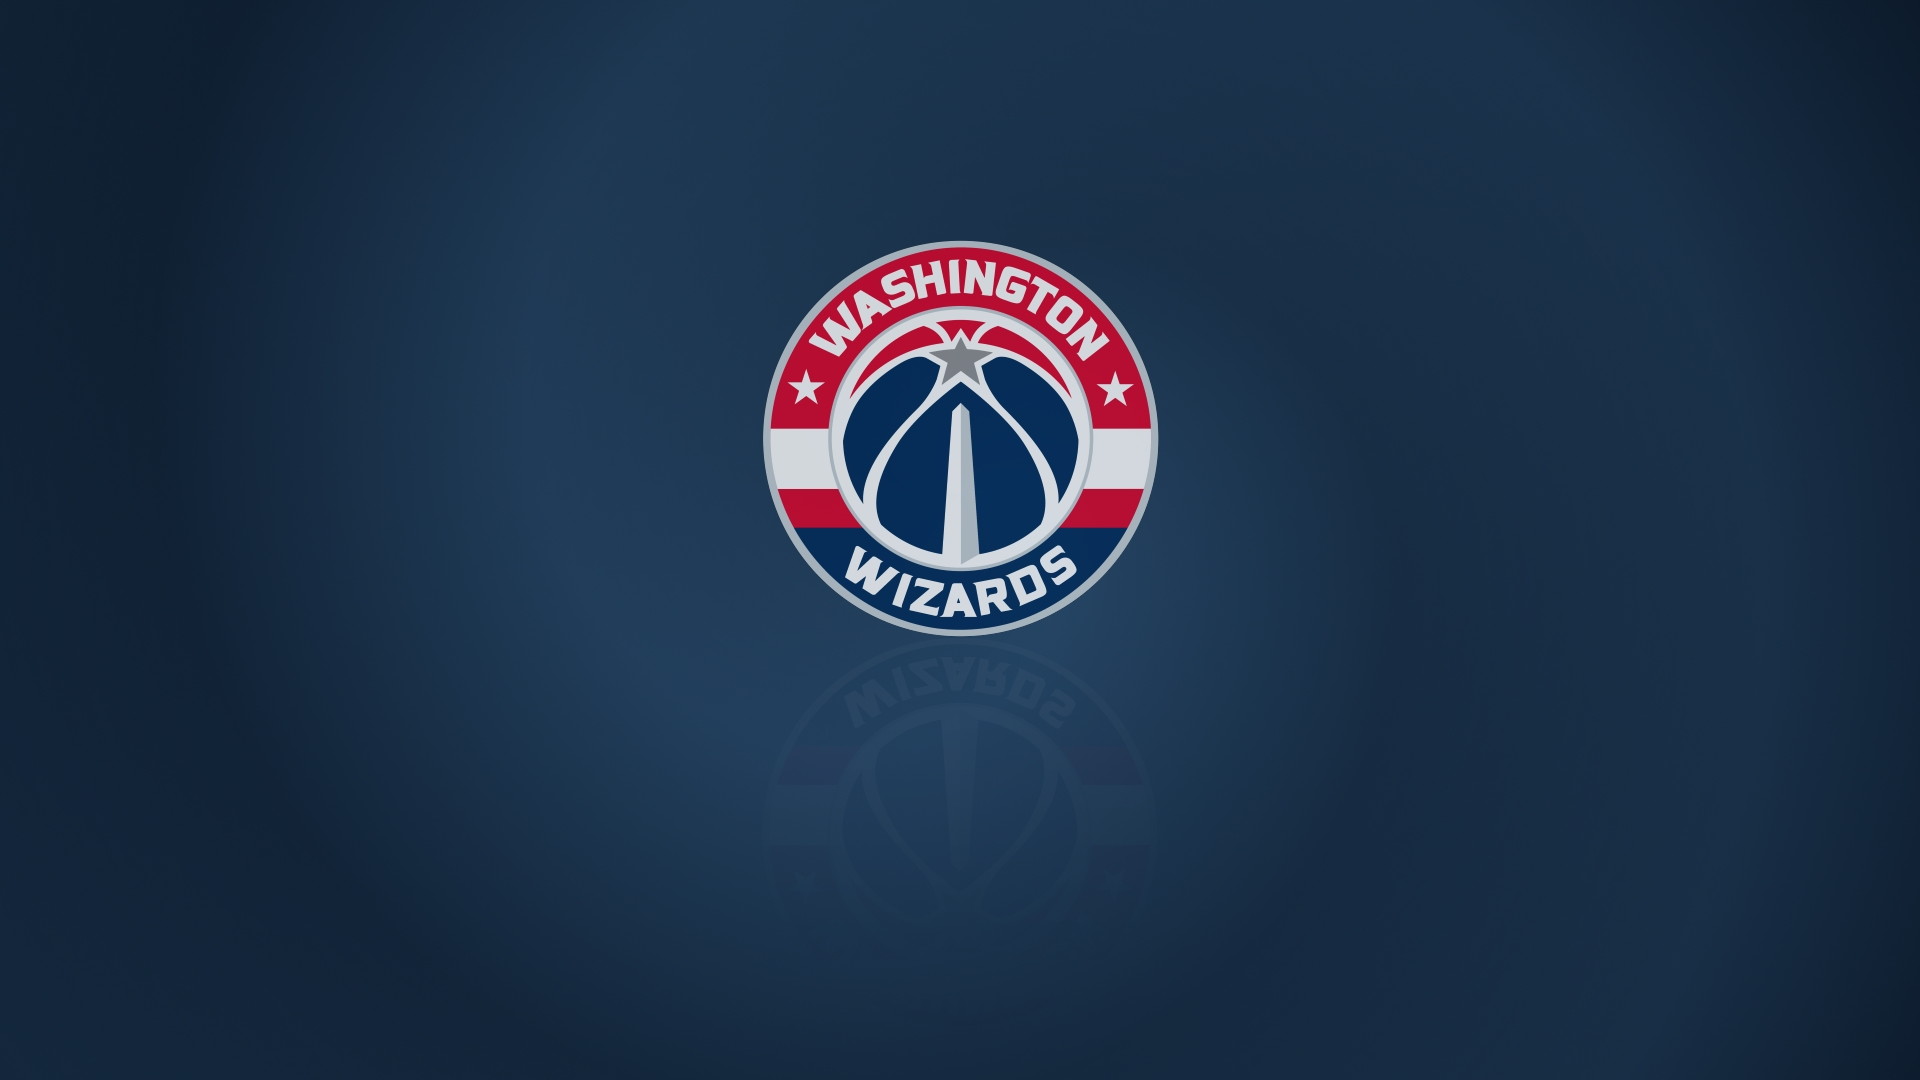 Windows Wallpaper Washington Wizards with high-resolution 1920x1080 pixel. You can use this wallpaper for your Desktop Computer Backgrounds, Windows or Mac Screensavers, iPhone Lock screen, Tablet or Android and another Mobile Phone device